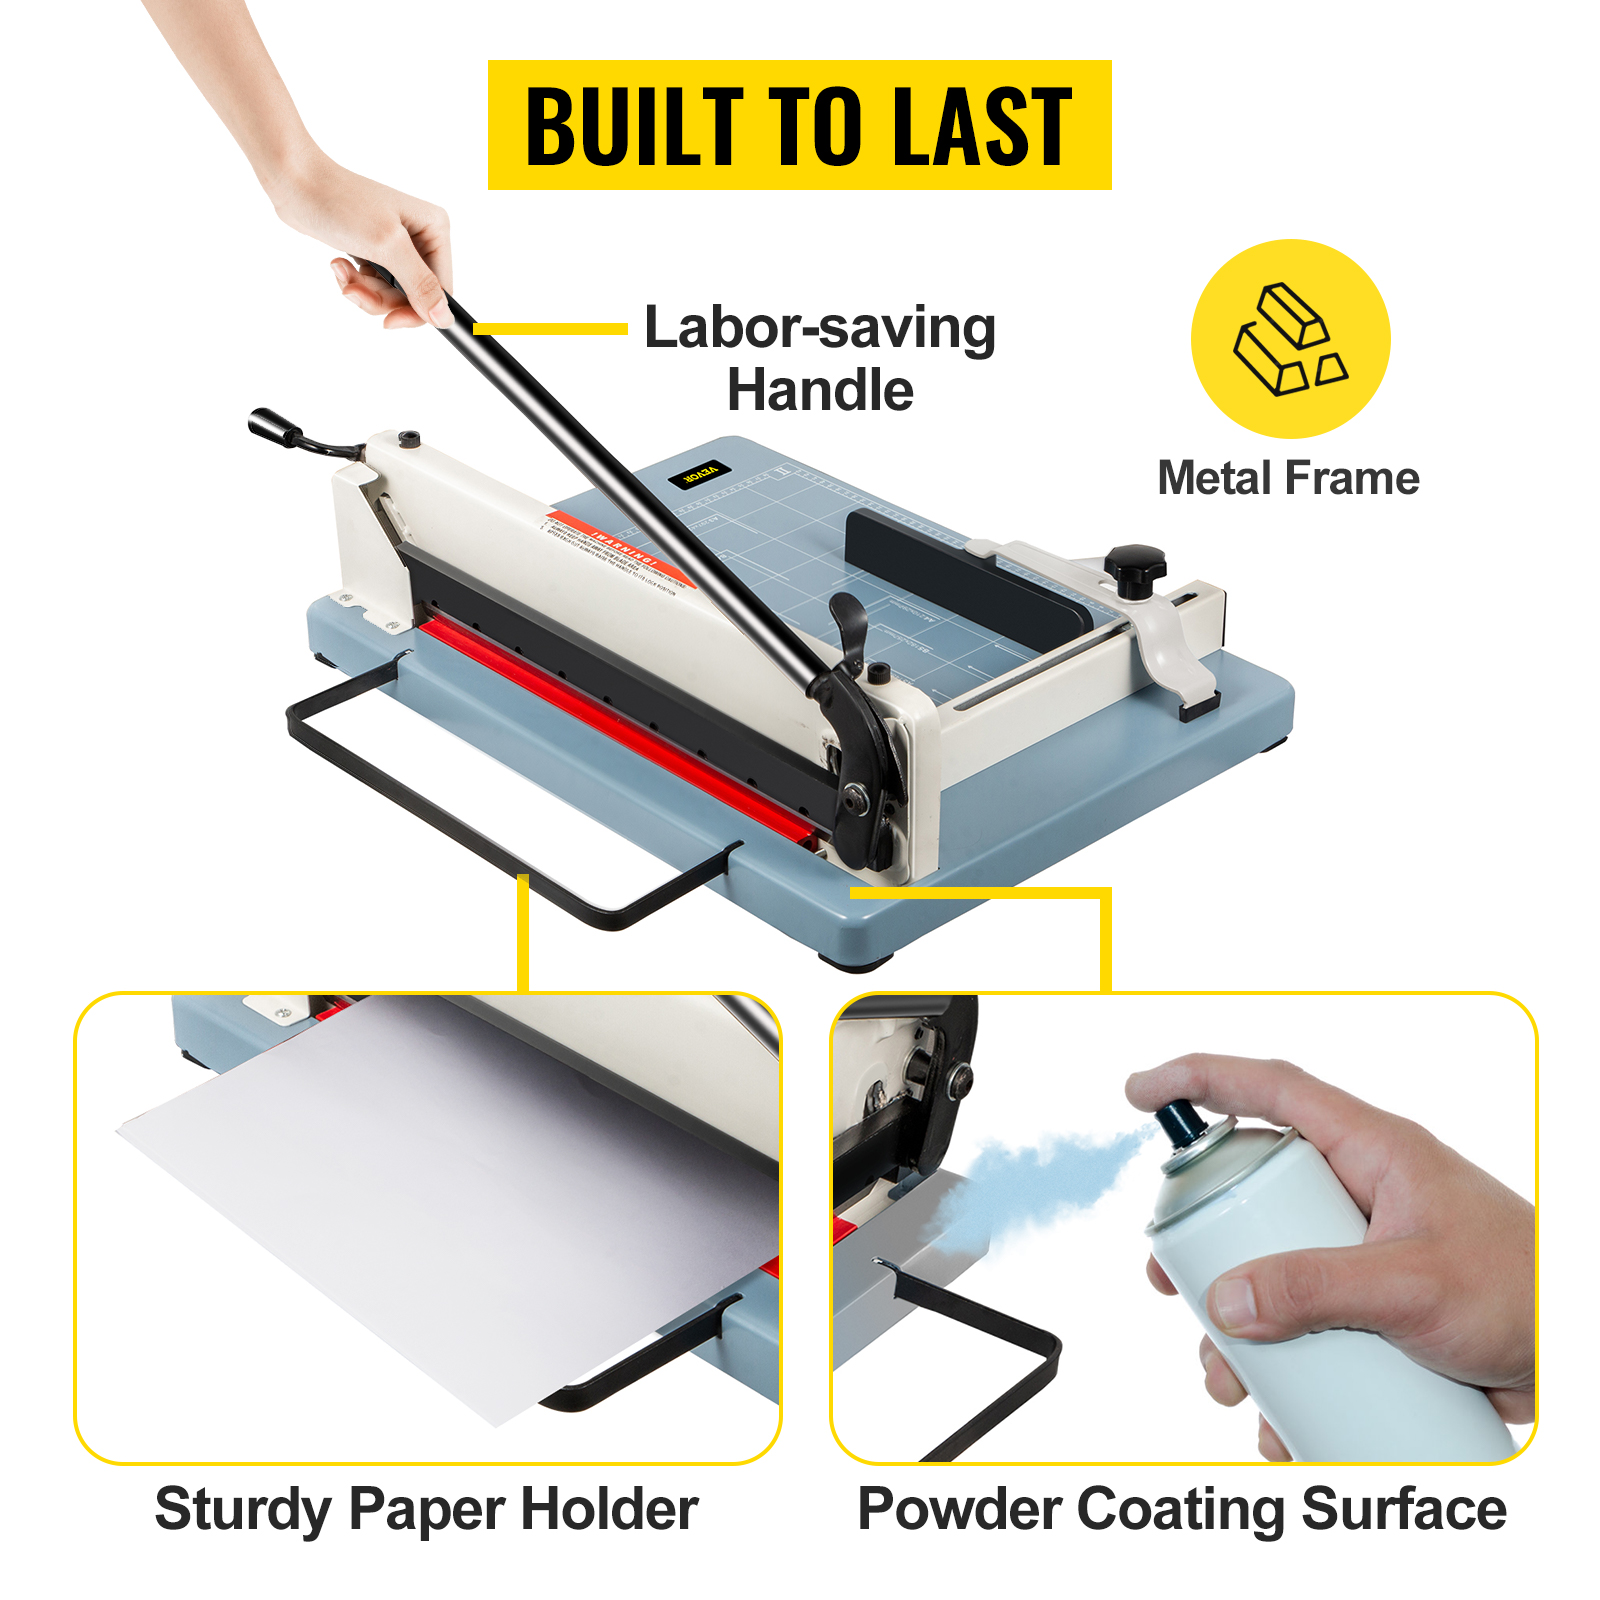 VEVOR Guillotine Paper Cutter 12,Heavy Duty Paper Cutter A4 400 Sheets, Paper Guillotine Cutting Width 30 cm,Paper Slicer Cutting Thickness Max 4